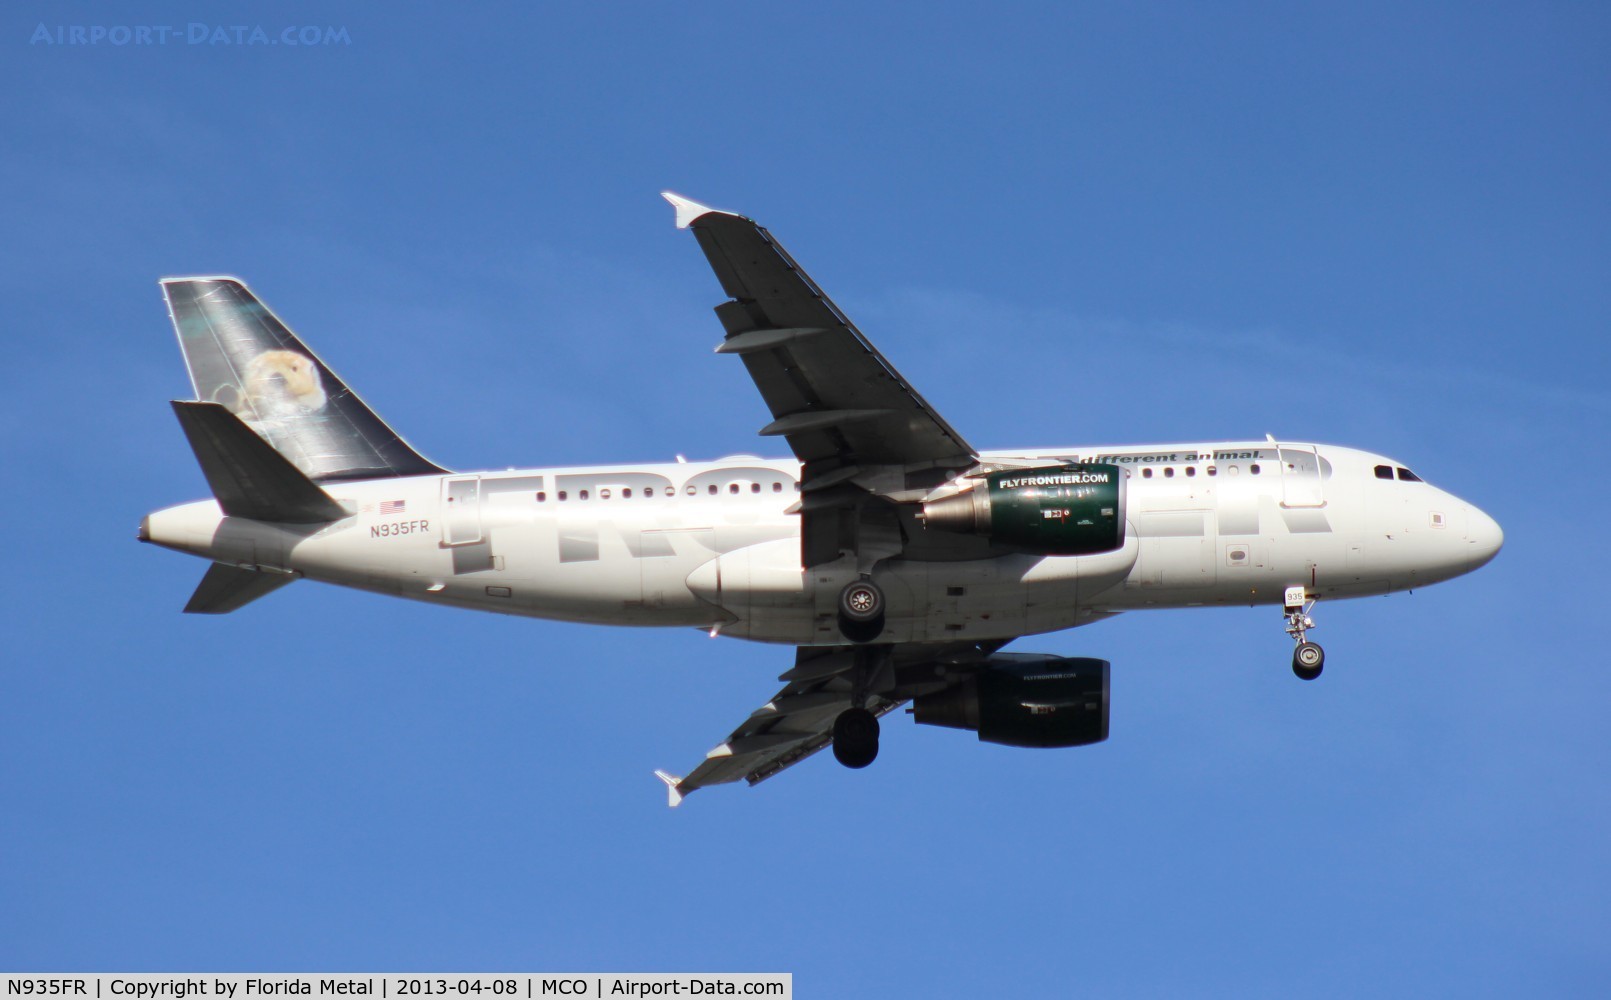 N935FR, 2004 Airbus A319-111 C/N 2318, Frontier Hector Sea Otter A319